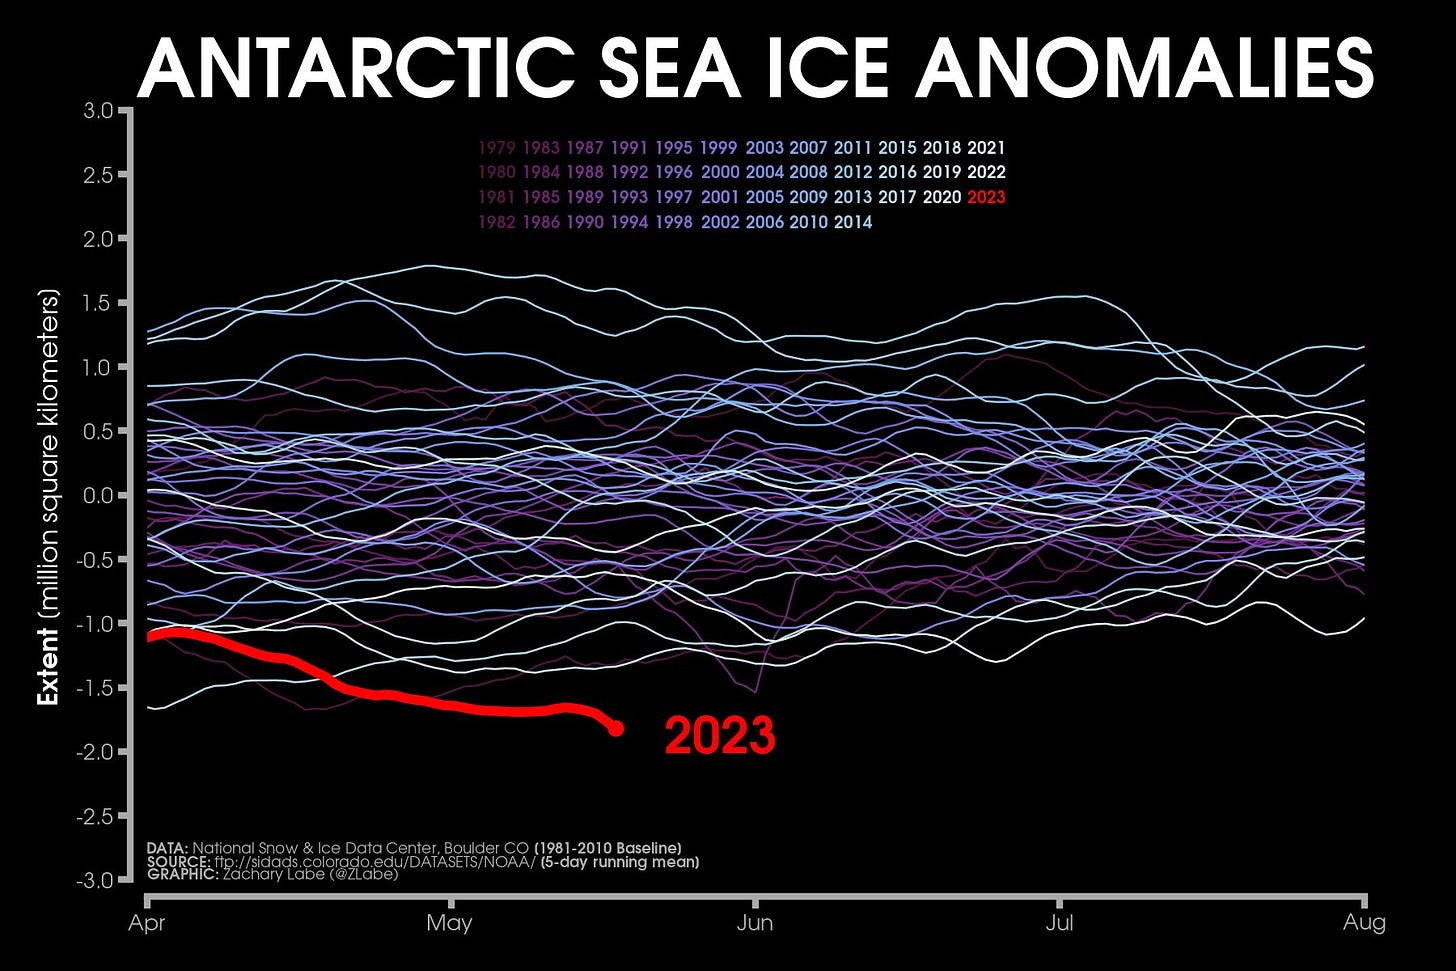 Line graph time series of 2023's daily Antarctic sea ice extent anomalies in red shading compared to each year from 1979 to 2022 using shades of purple to white for each line for days between April 1 and August 1. Anomalies are computed relative to a 1981-2010 baseline. There is substantial interannual and daily variability. There are no clear long-term trends.